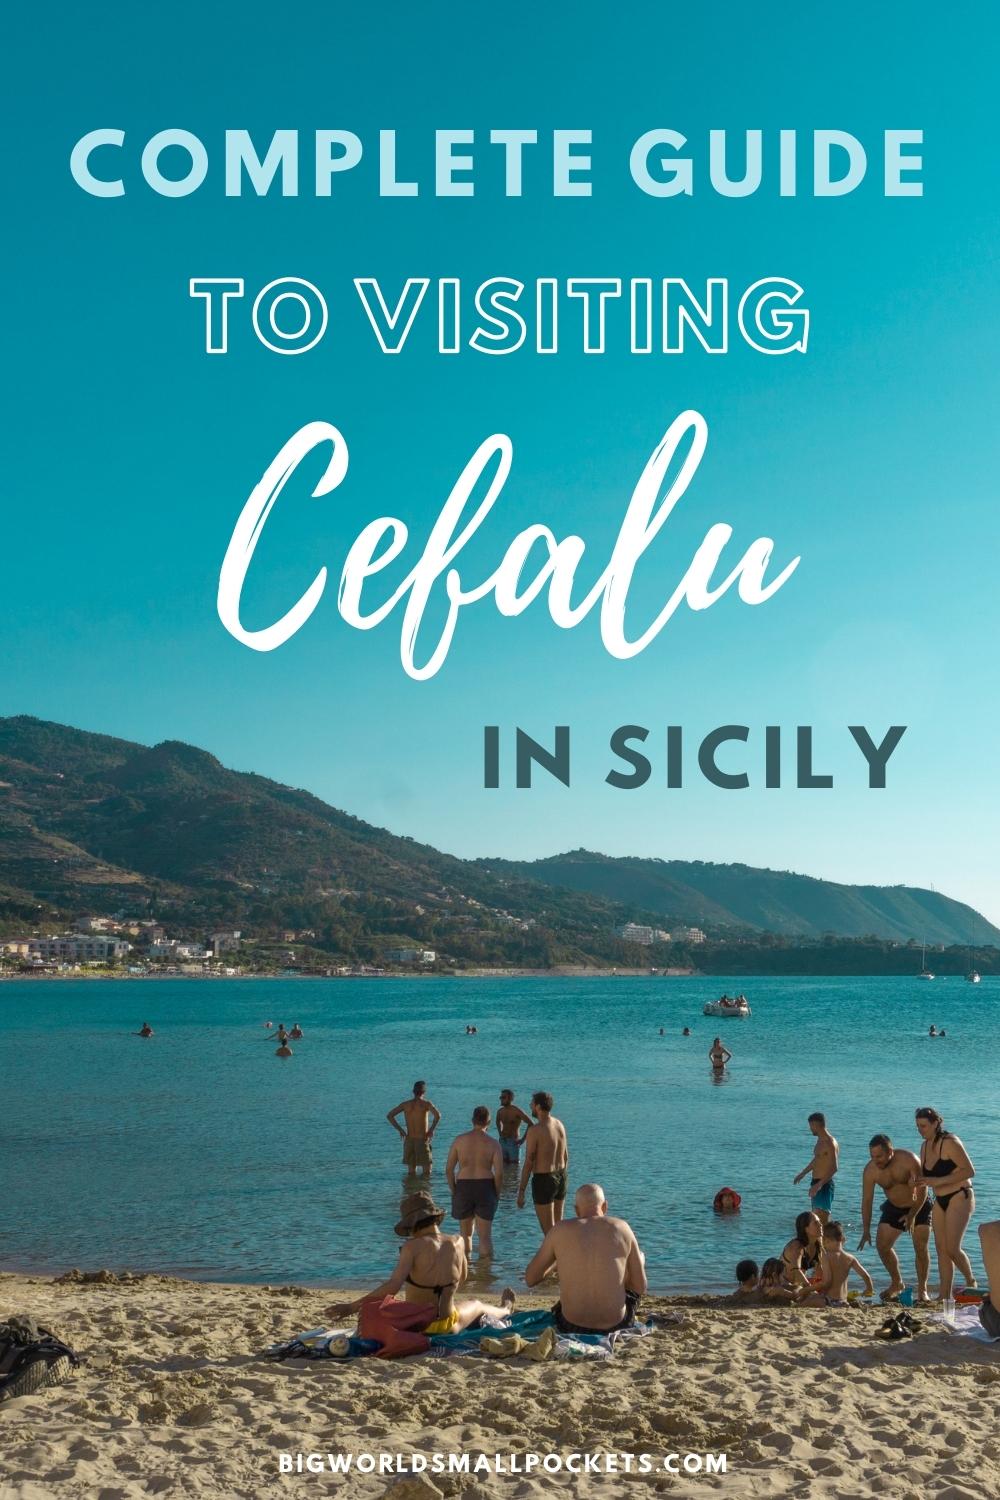 Complete Guide to Visiting Cefalù & the Beach